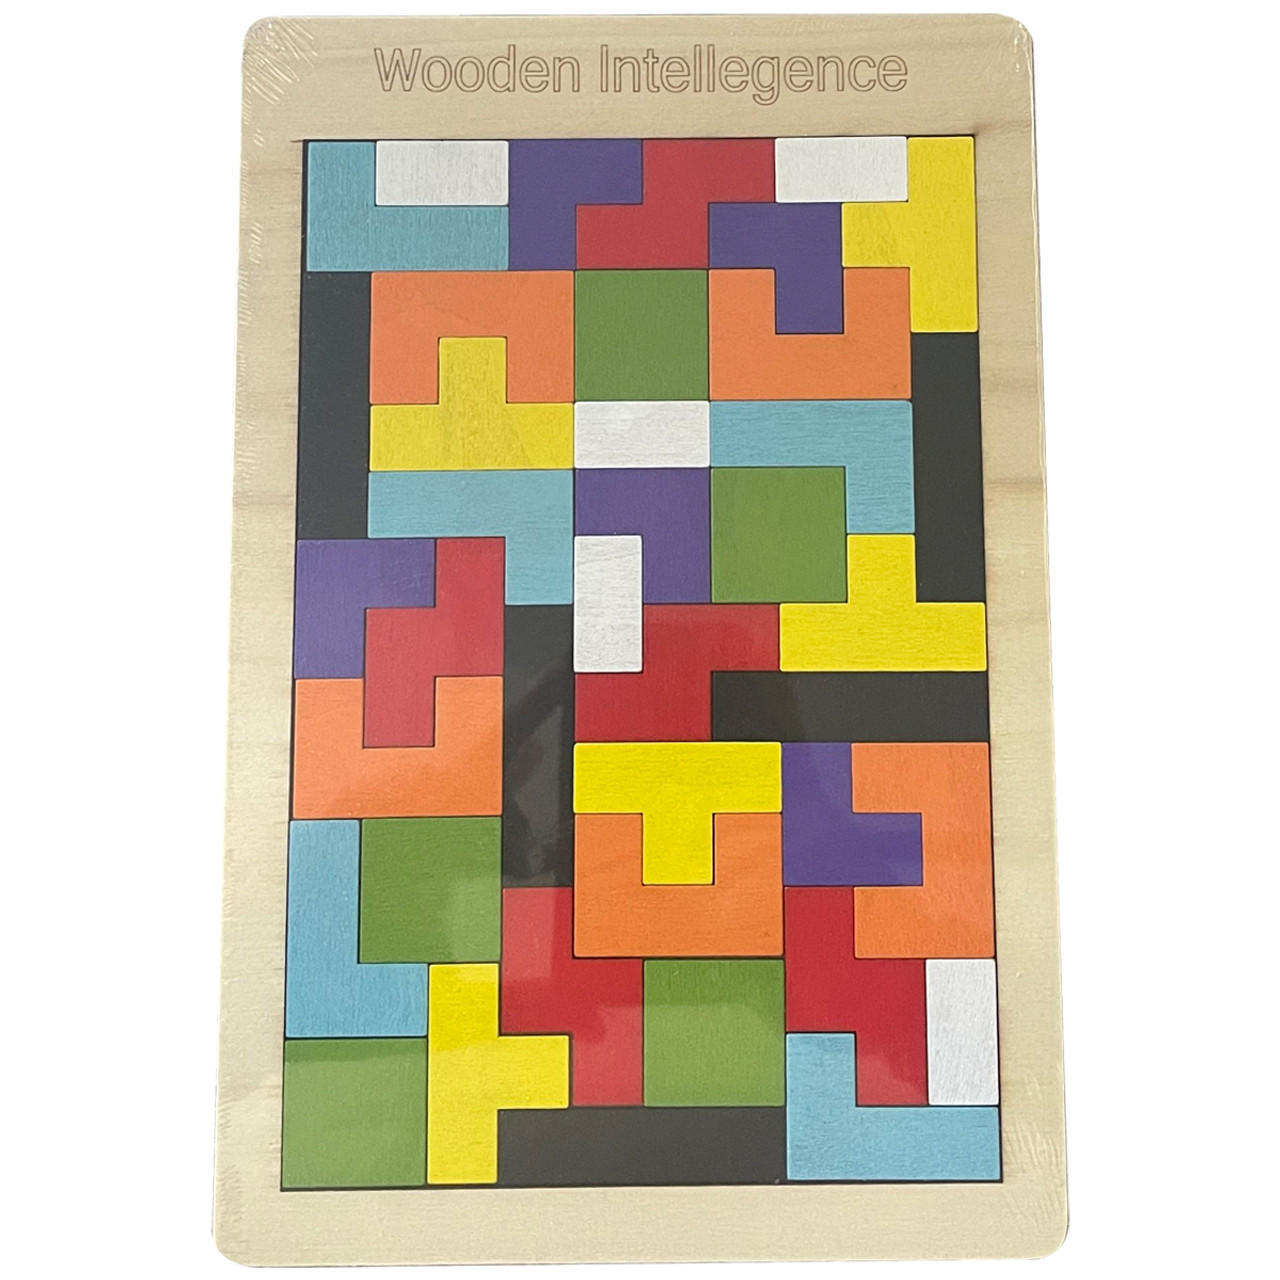 40-Piece Wooden Tetromino Jigsaw Puzzle Brain Teaser Game product image